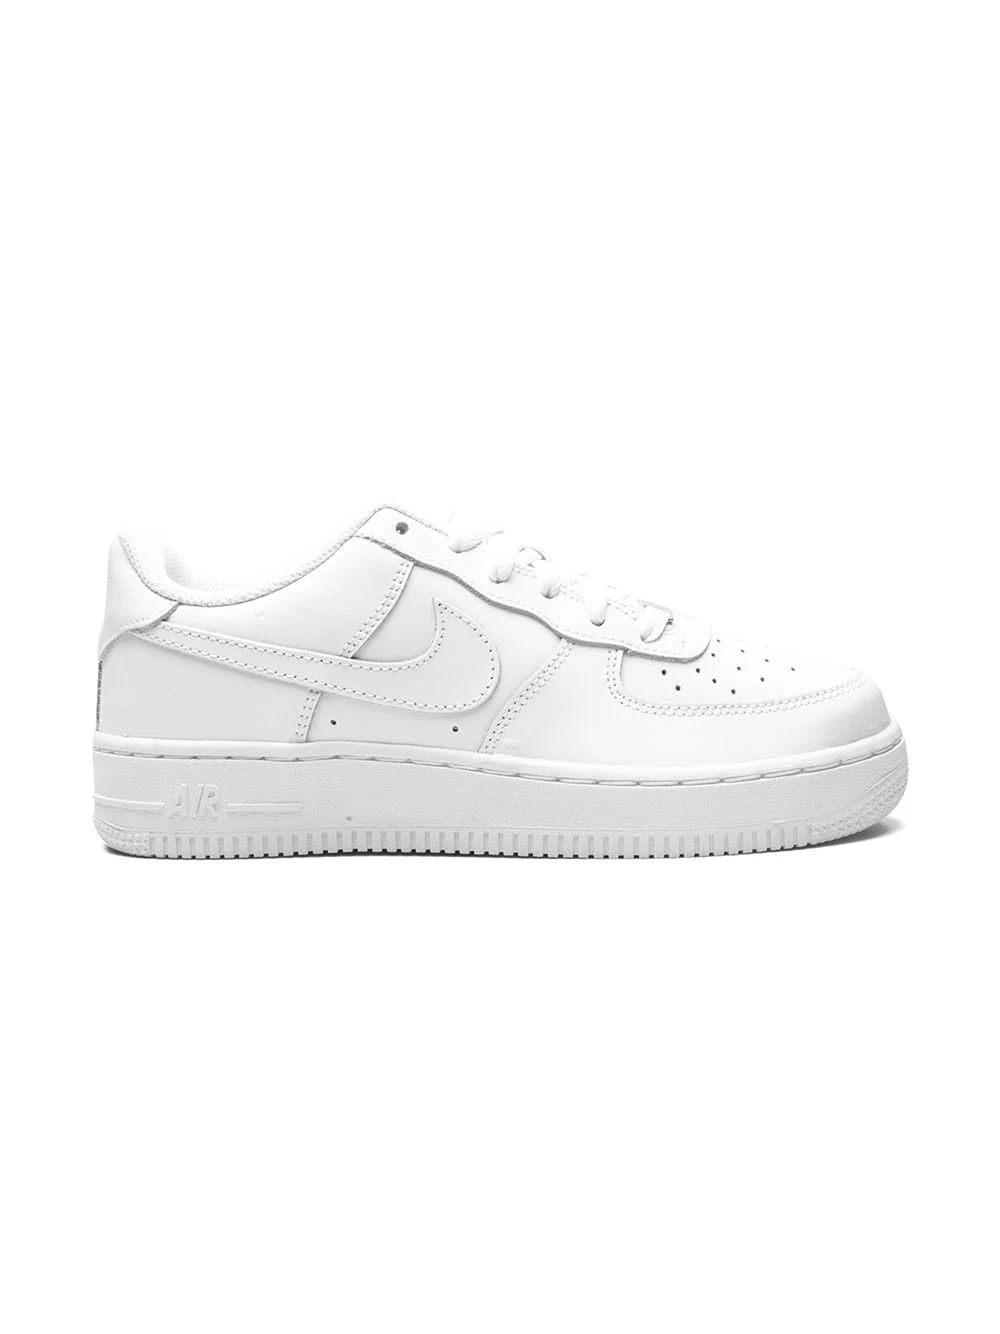 Air Force 1 Low LE "White On White" sneakers | Farfetch Global